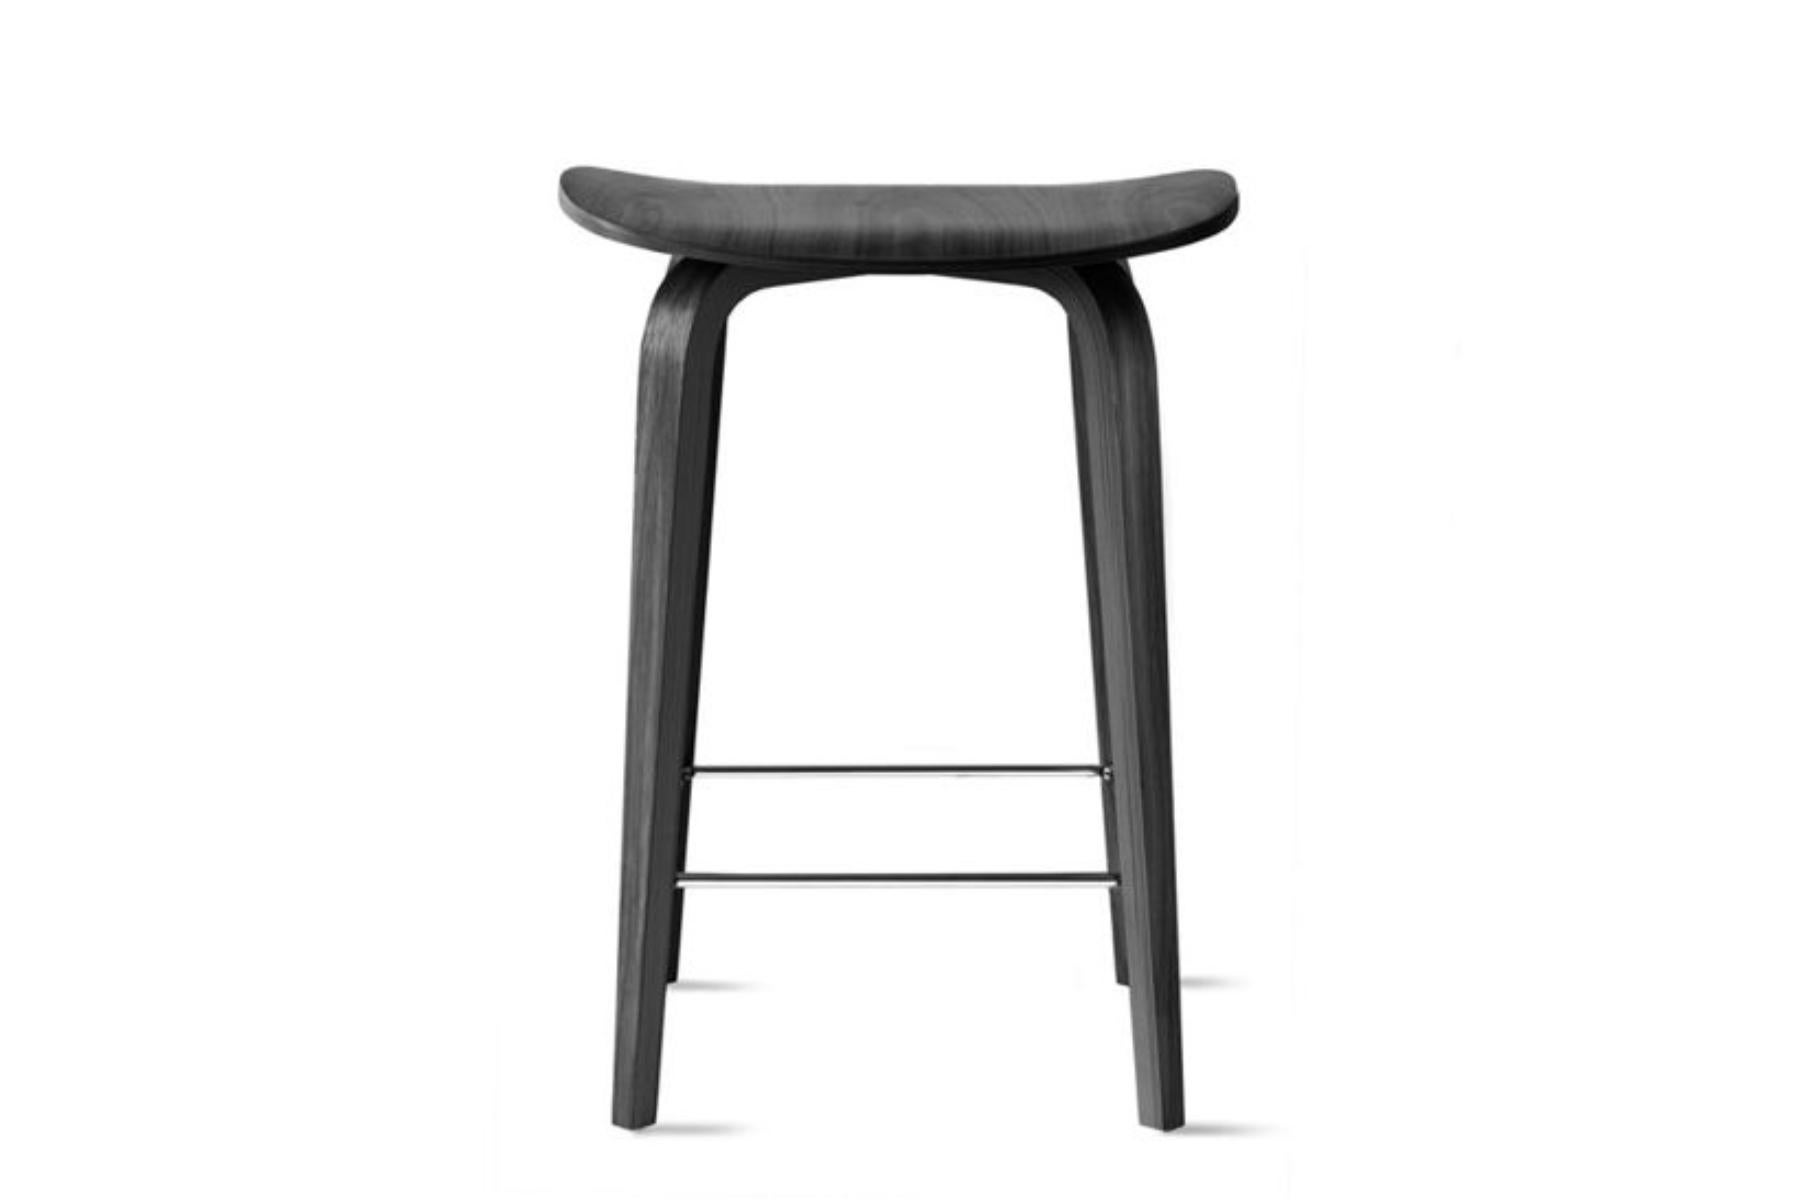 The latest design from Benjamin Cherner. The under counter stool features a molded plywood seat with laminated wood base and a bright chrome footrest. Available in bar and counter heights. Upholstered seat pad is available in fabric or leather. Made